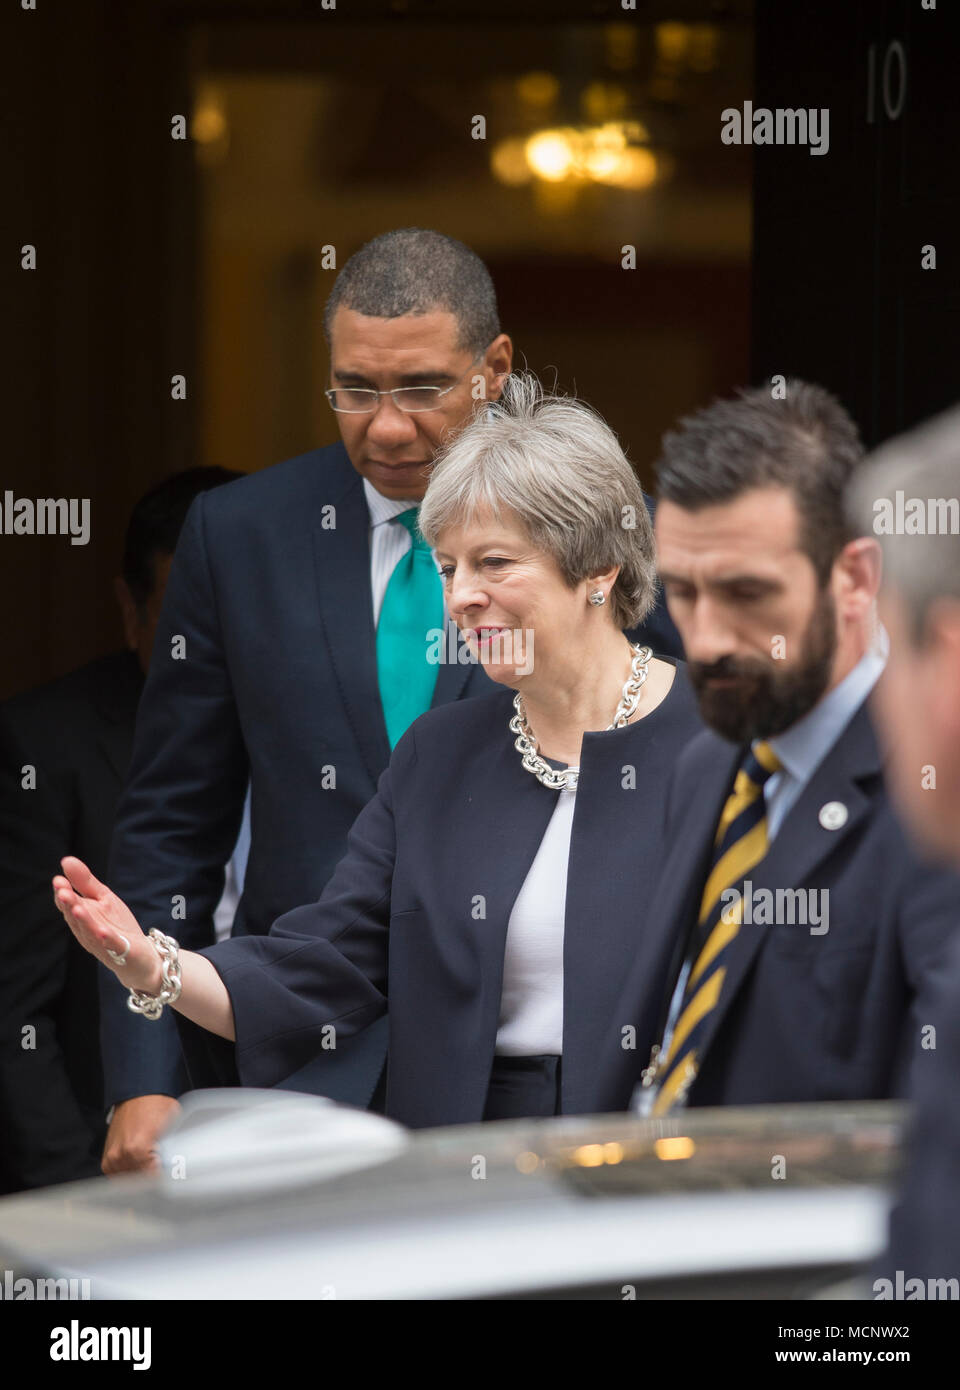 Downing Street, London, UK. 17th April, 2018. British Prime Minister Theresa May leaves 10 Downing Street in London with Jamaican Prime Minister Andrew Holness. Credit: Malcolm Park/Alamy Live News. Stock Photo